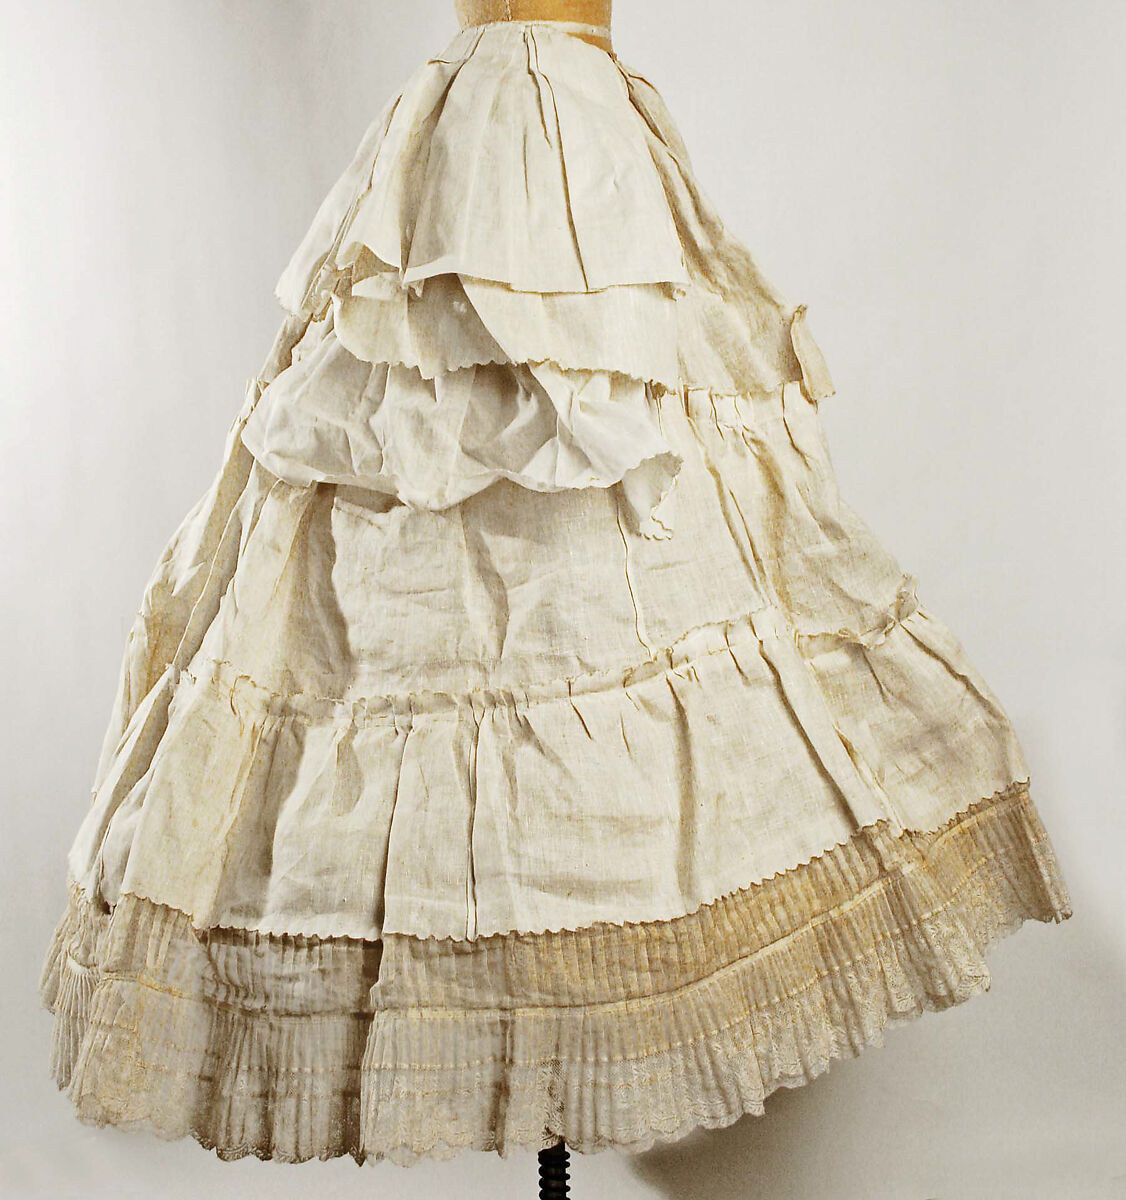 Cage crinoline, horsehair, probably American 